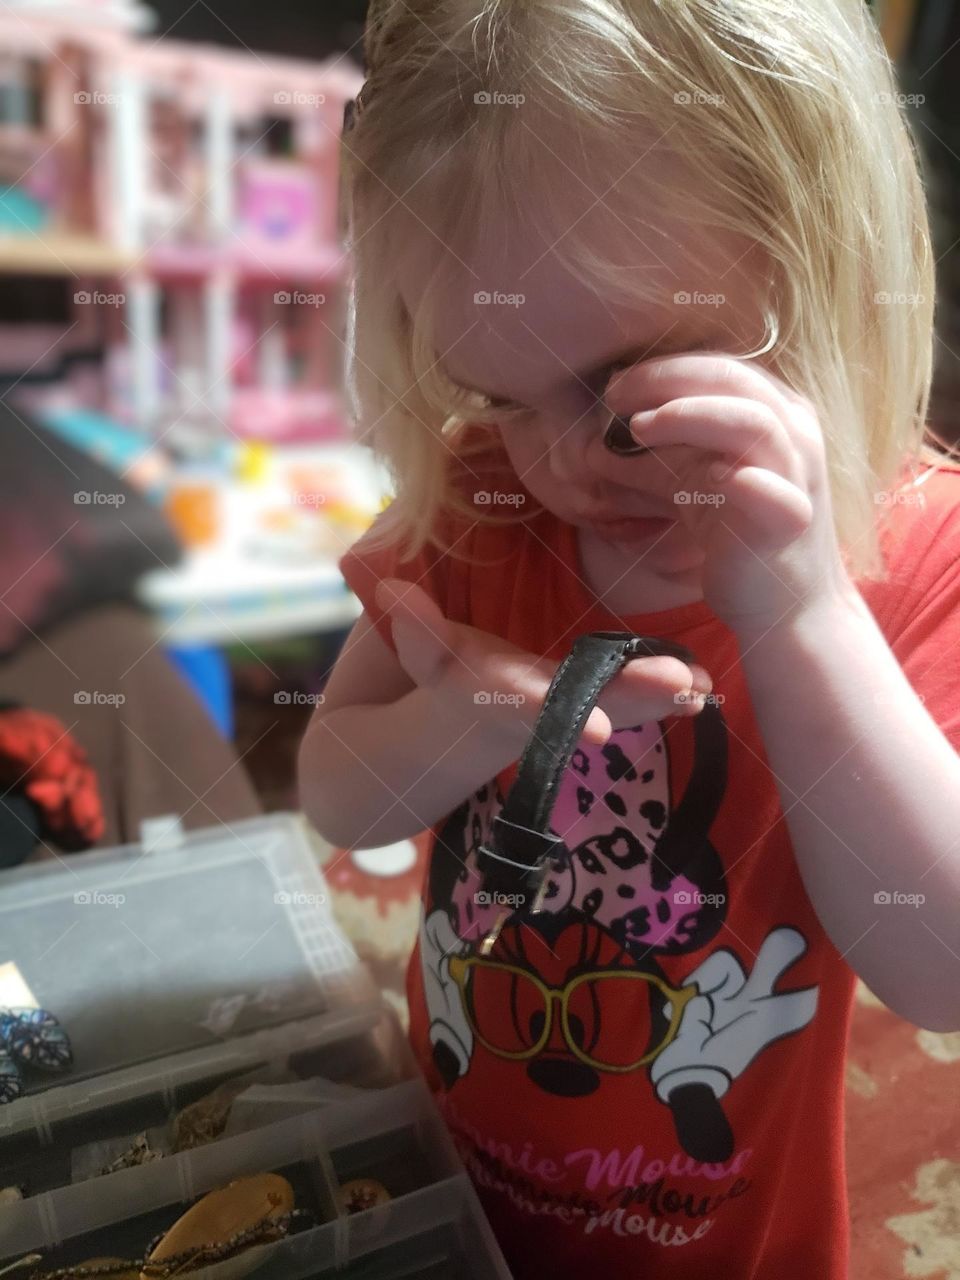 My future jeweler! loves to look at jewelry with the loupe!